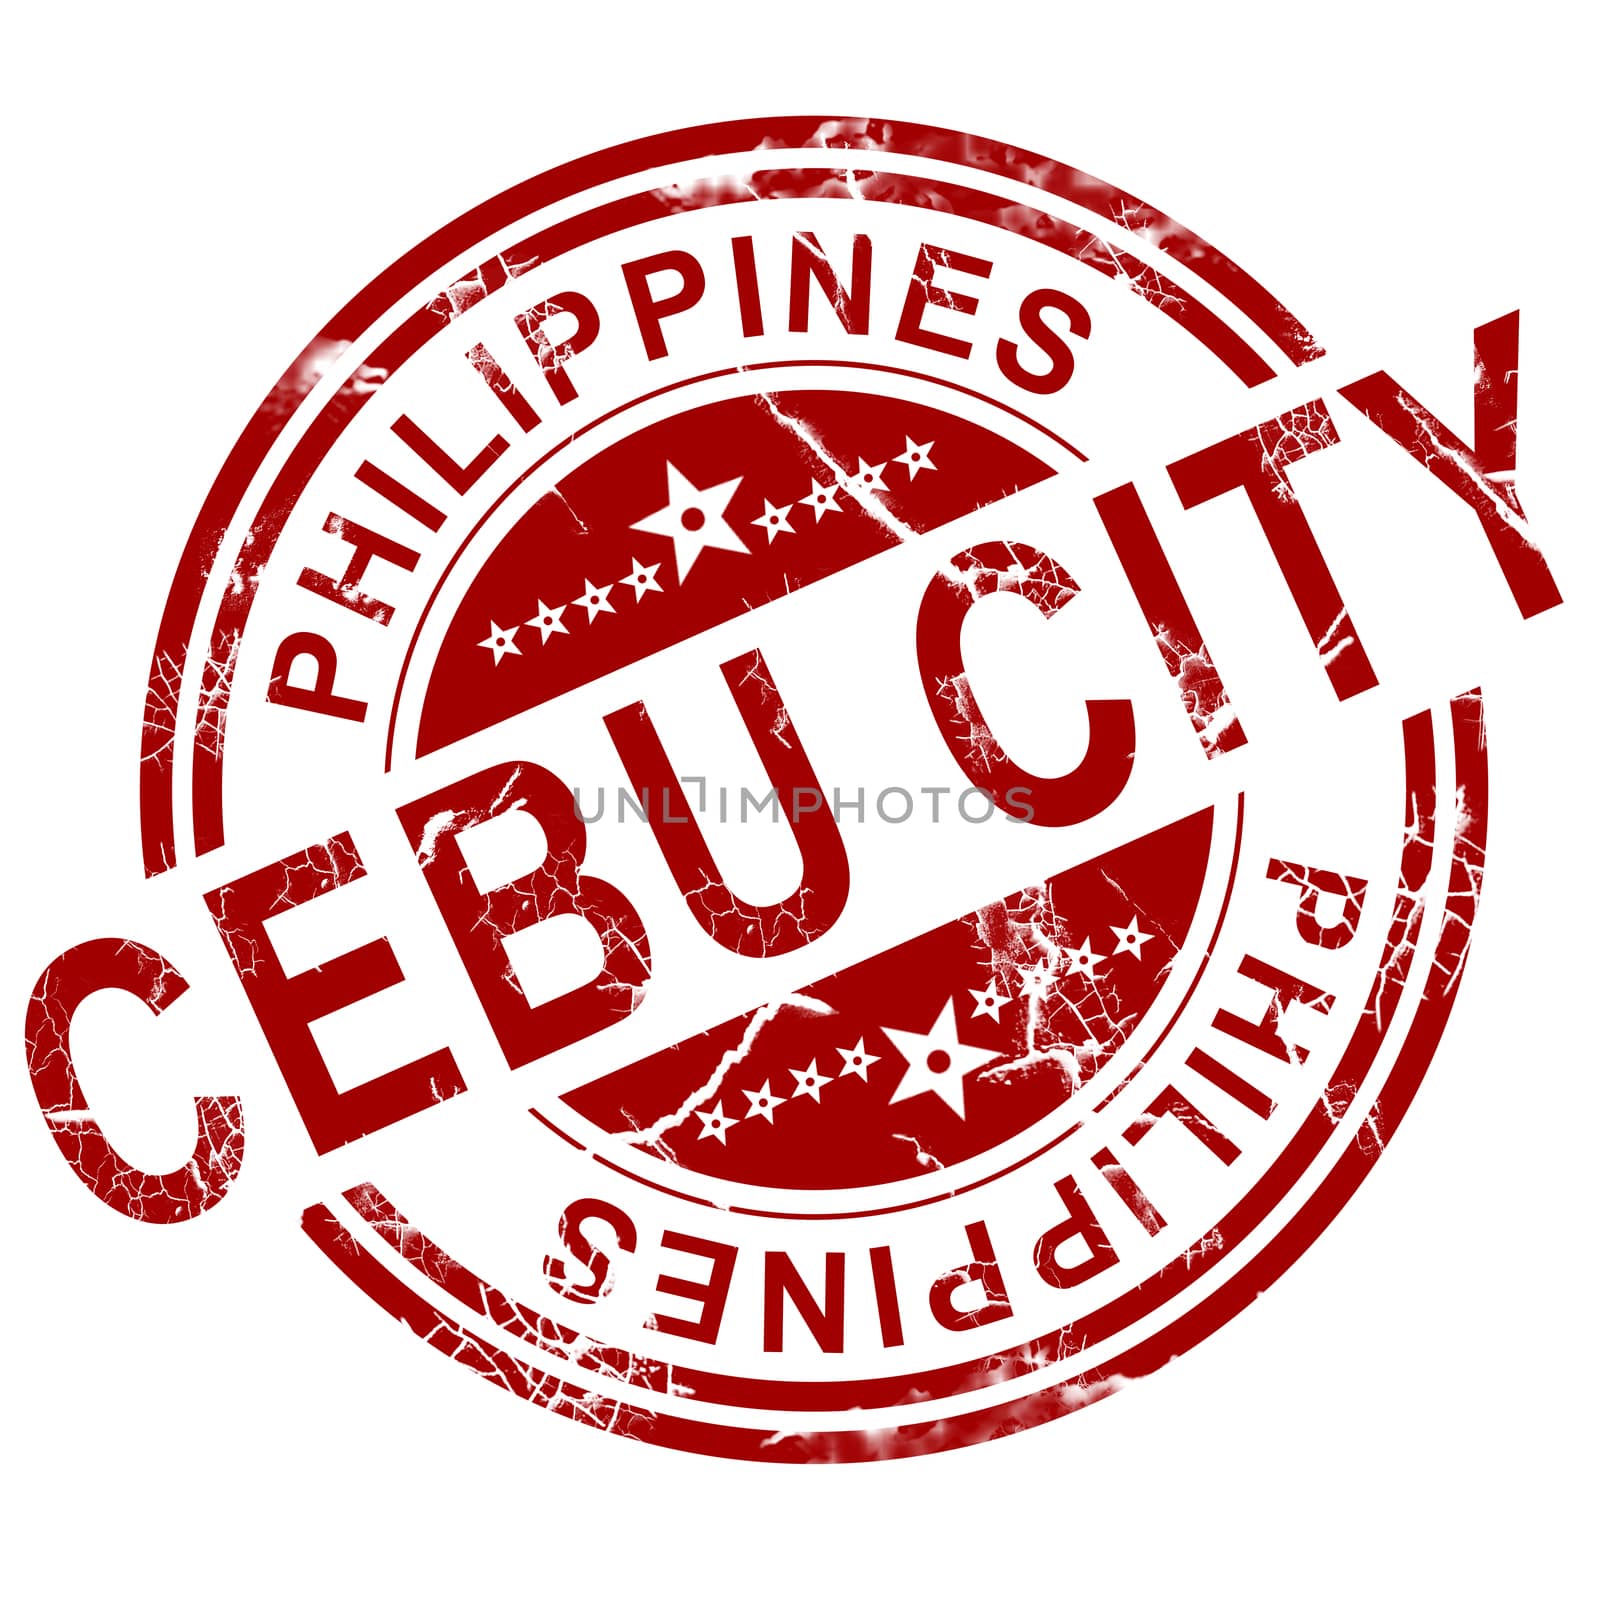 Red Cebu stamp with white background, 3D rendering